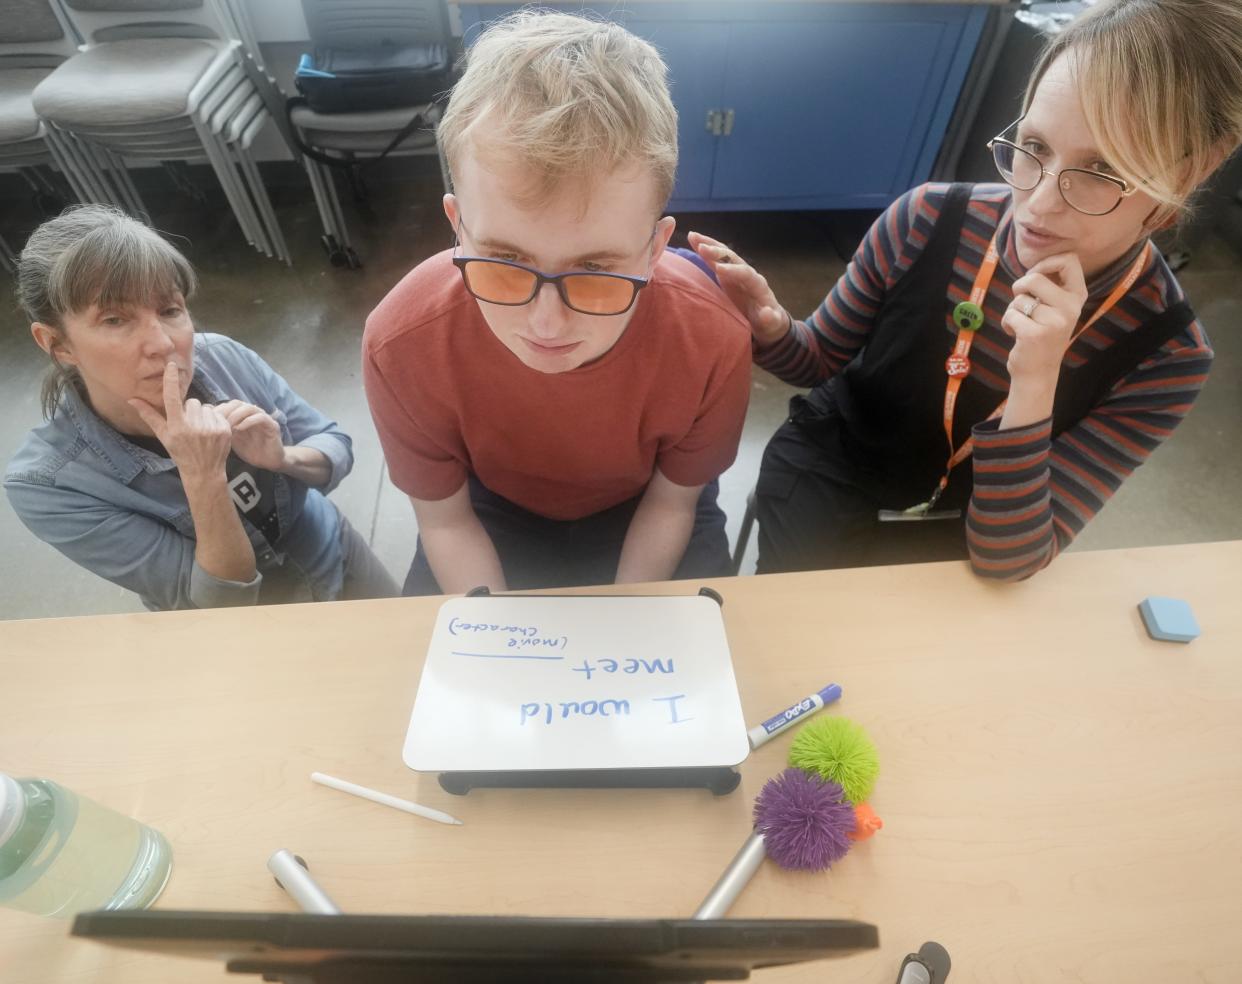 At an Islands of Brilliance workshop, Margaret Fairbanks (left) and Kate Siekman work with Grant, an autistic person who primarily uses assistive technology to speak.